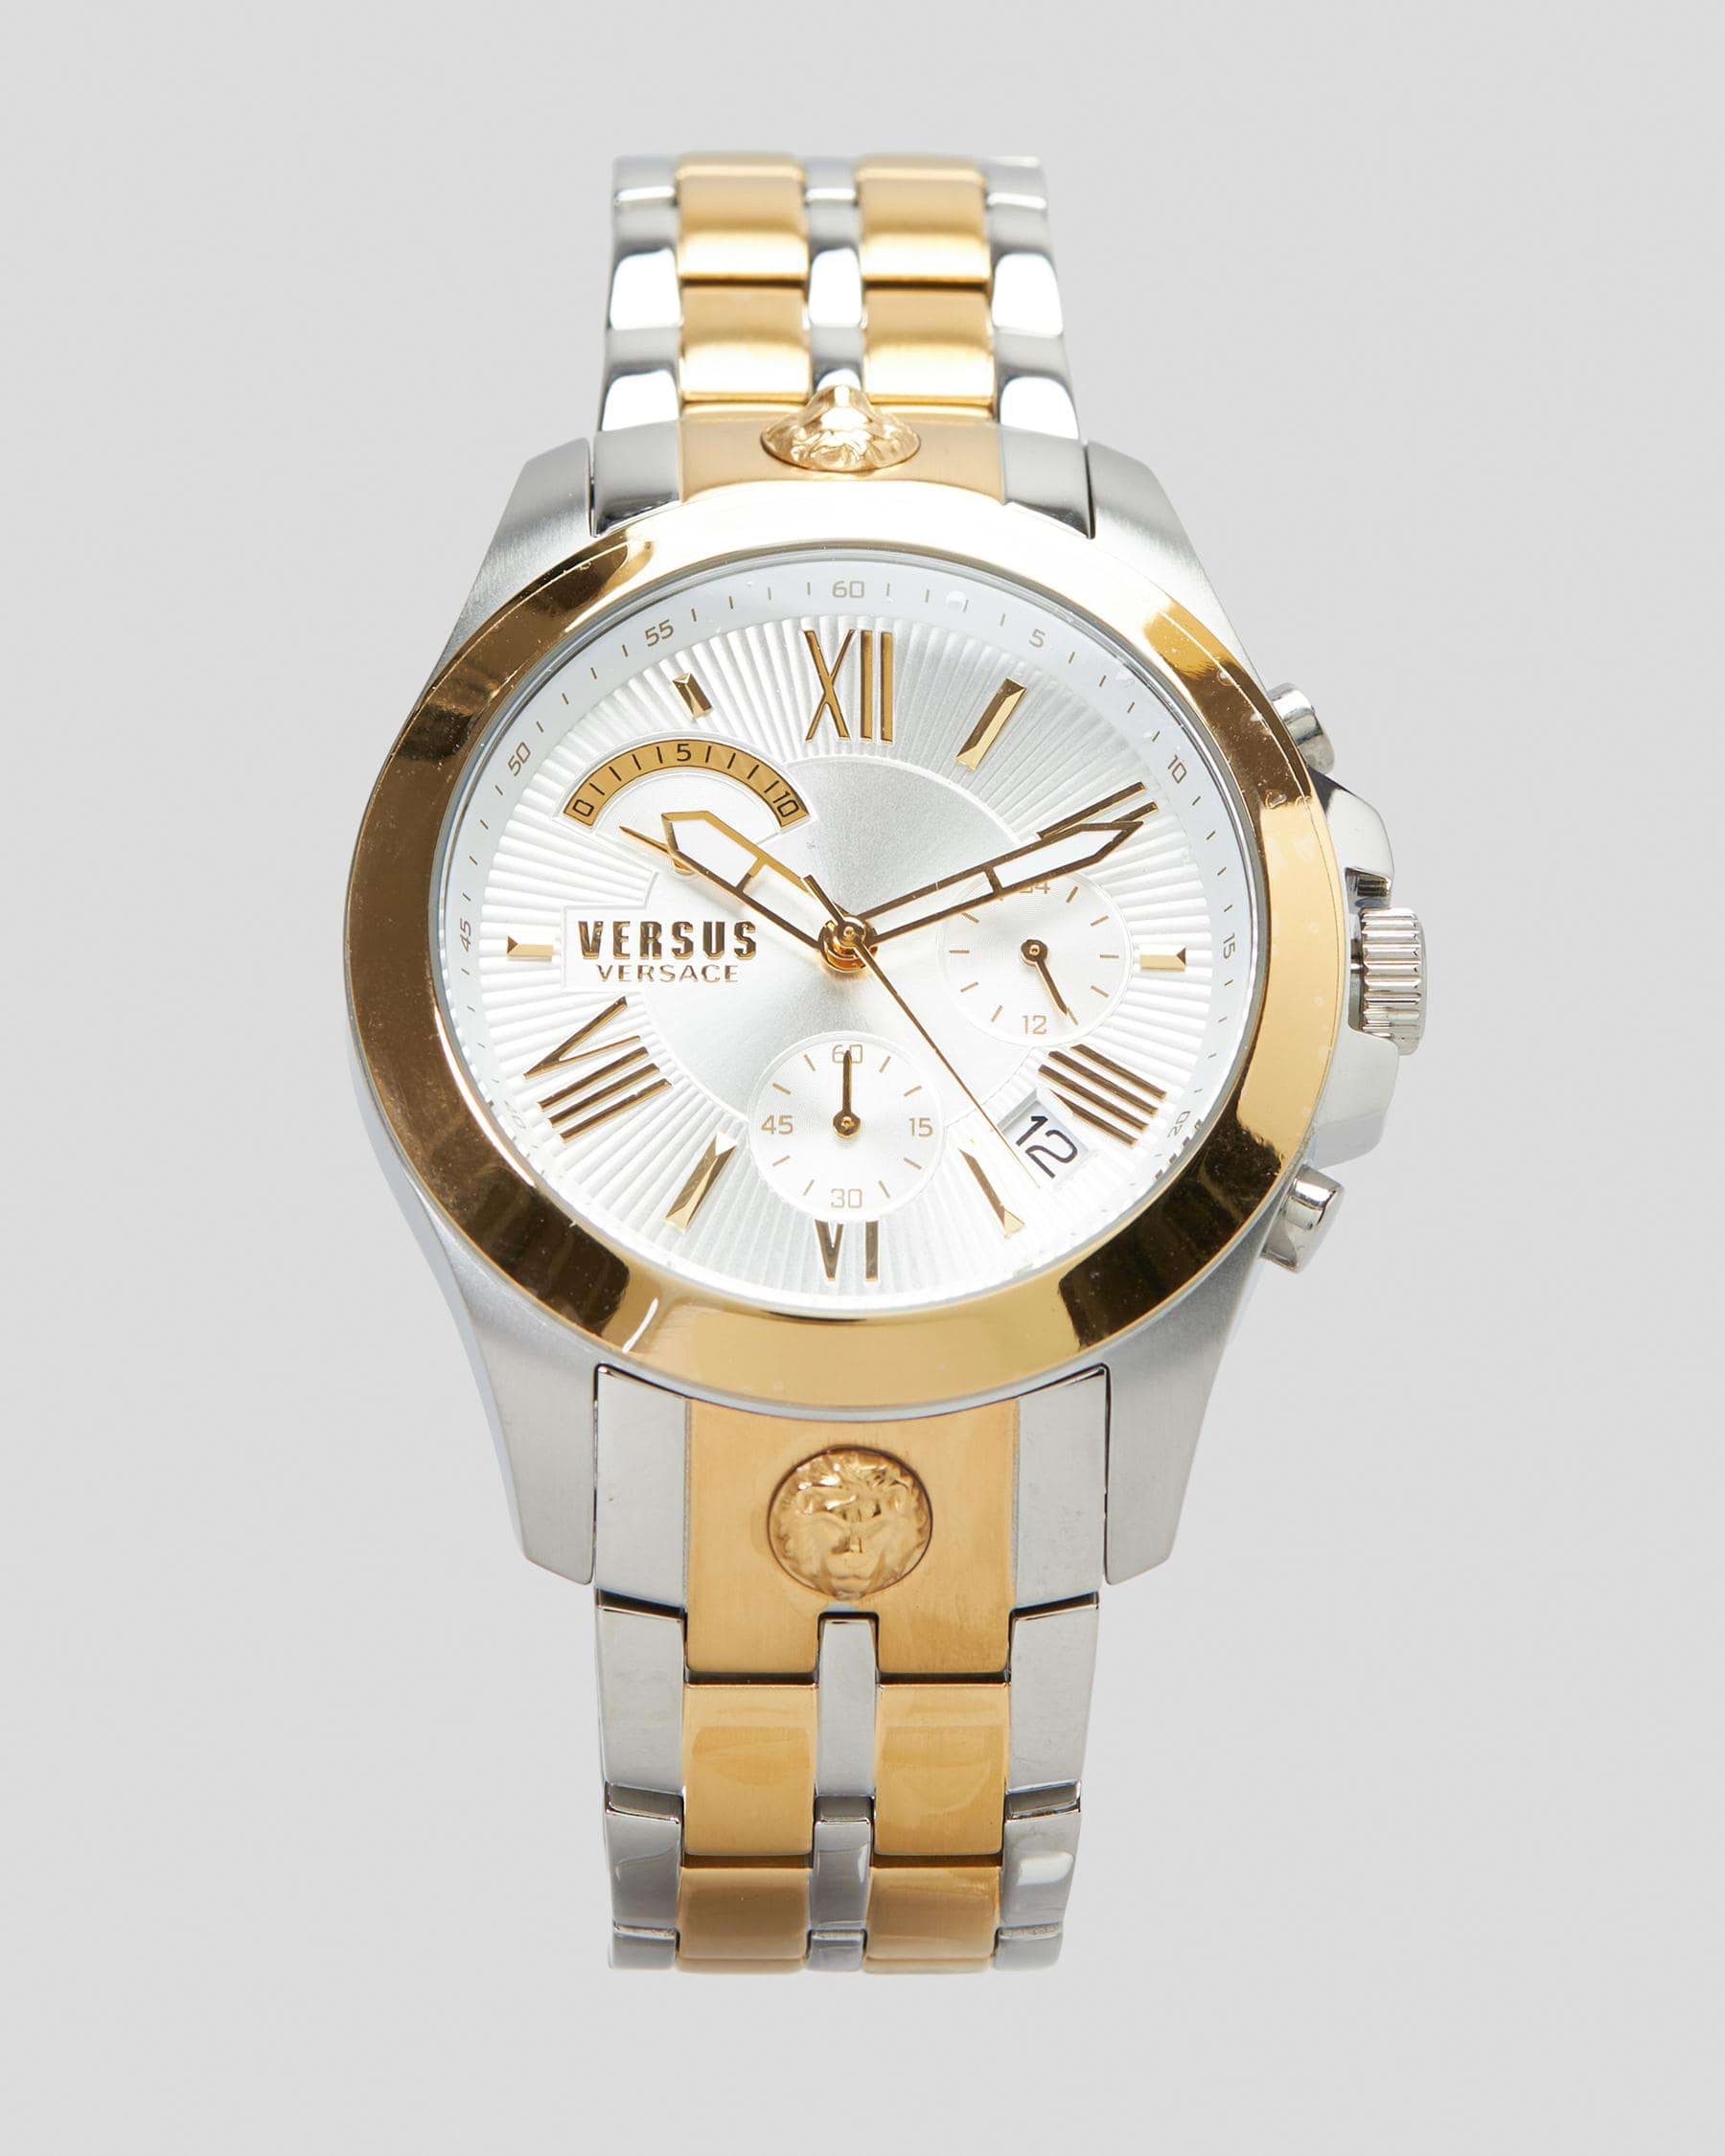 Versus Versace Chrono Lion Watch In Two Tone Gold / Silver - Fast ...